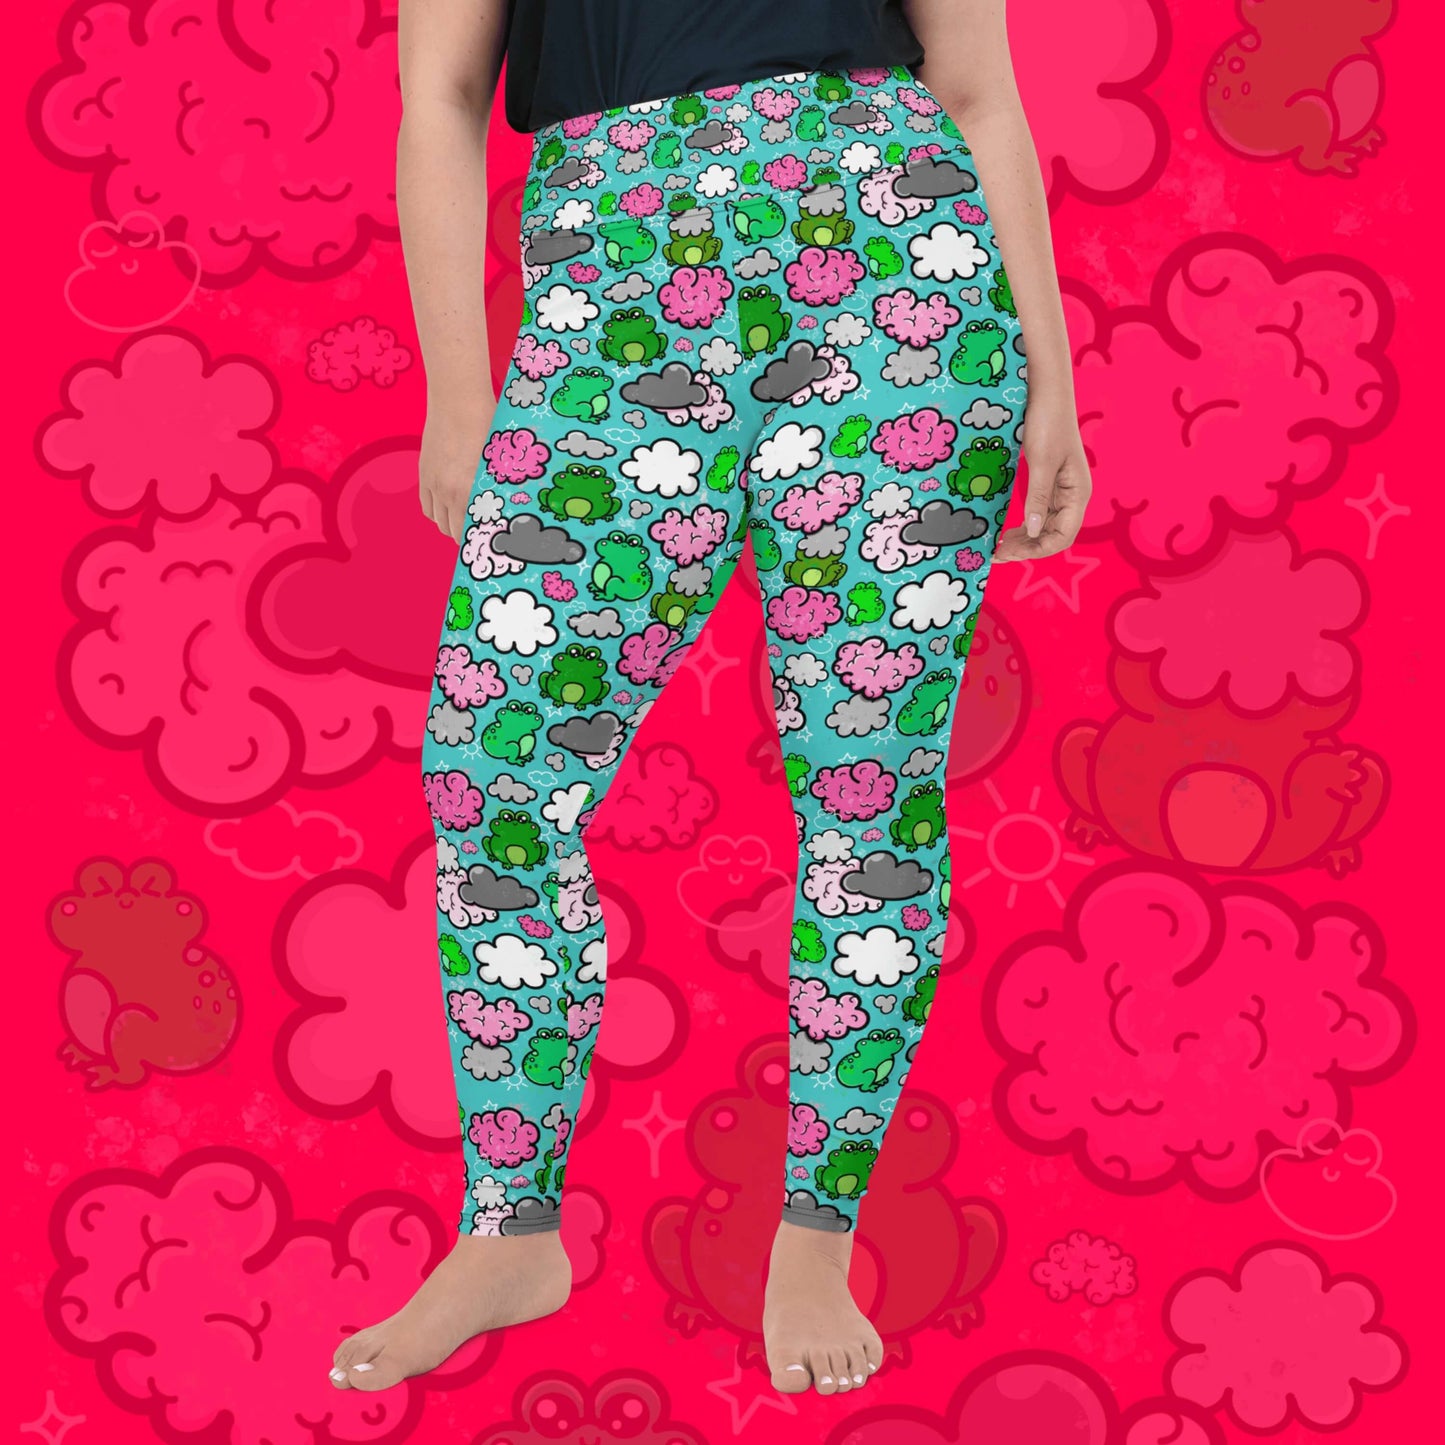 The Brain Frog Plus Size Leggings - Brain Fog being worn by a model facing forward with their left leg bent on a red background with a faded brain frog print, the photo is cropped from the hips down. The leggings are an aqua blue base with various green kawaii face frogs with pink blush cheeks, pink brain style clouds, white and grey clouds and white sparkles all over. The design was created to raise awareness of Brain Fog.